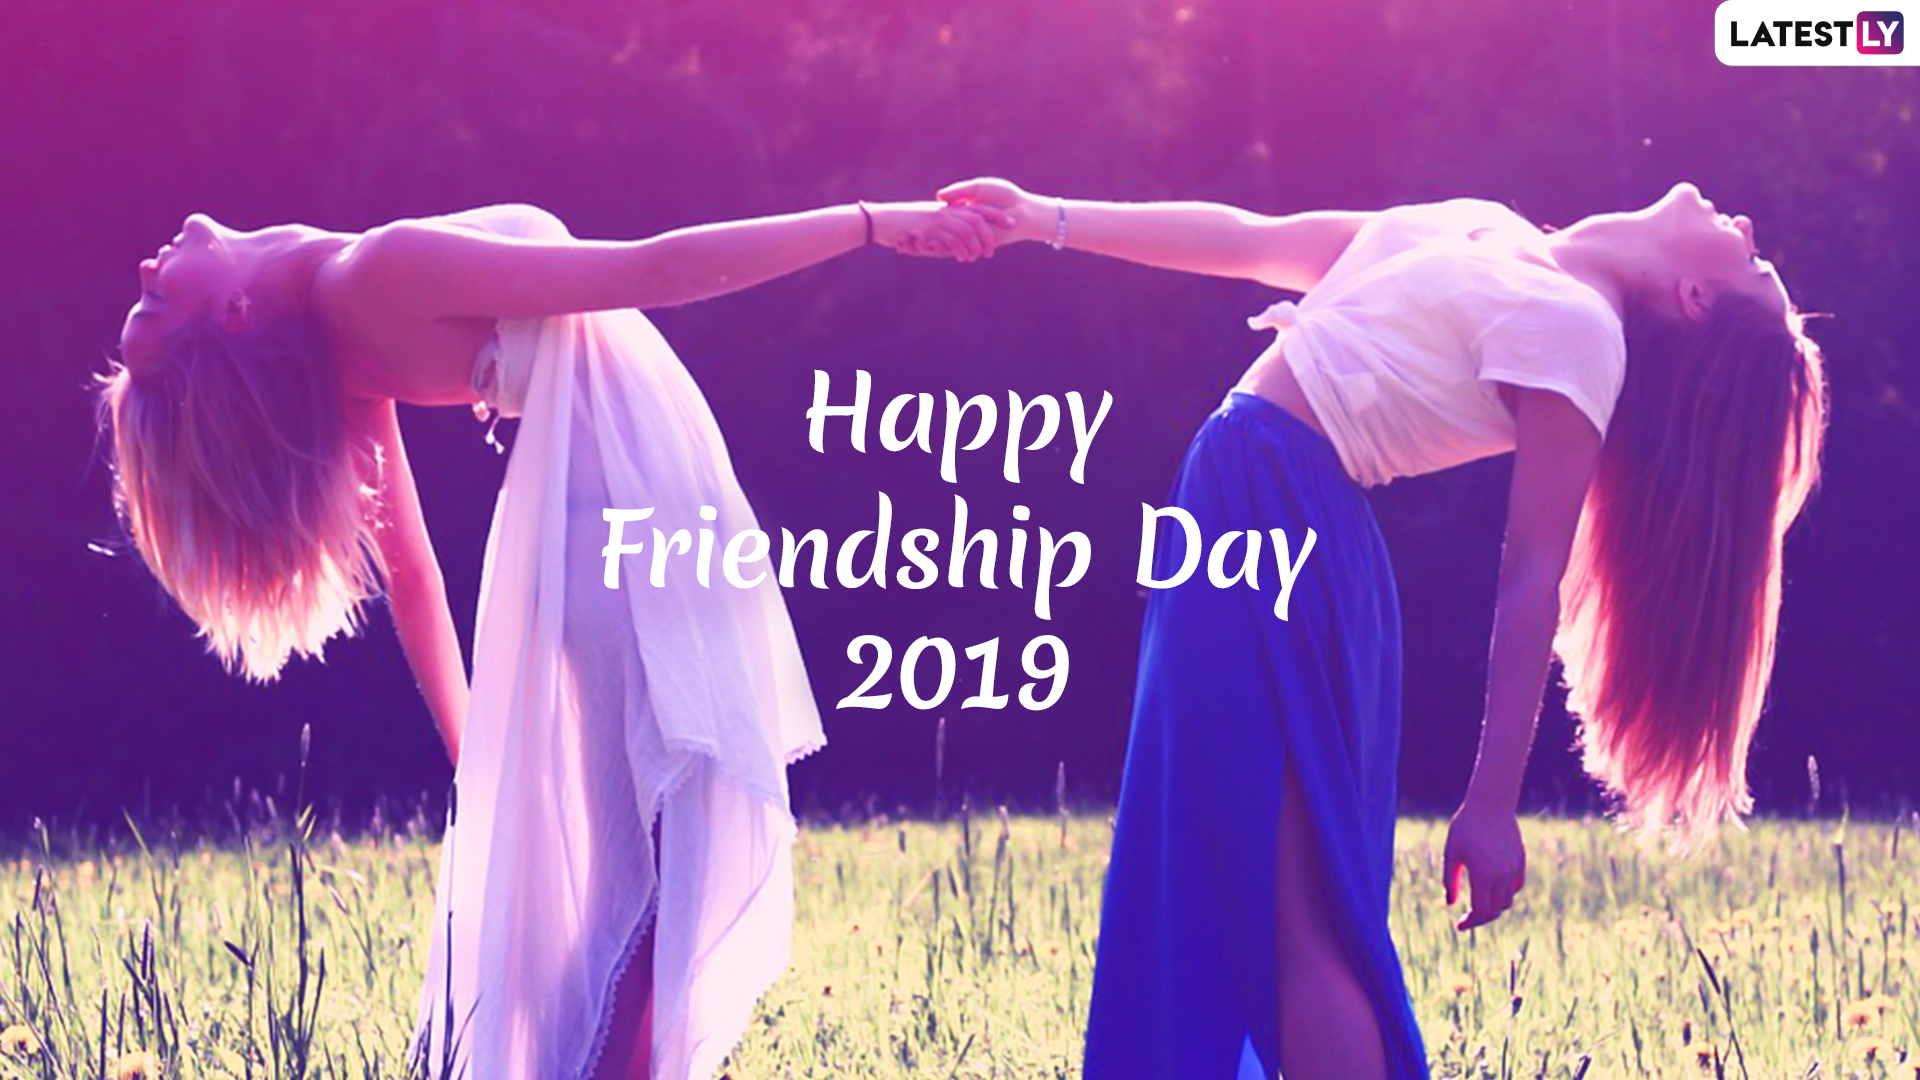 Happy Friendship Day Images & HD Wallpapers for Free Download: Wish on  World Friendship Day 2019 With Beautiful GIF Greetings & WhatsApp Sticker  Messages | 🙏🏻 LatestLY